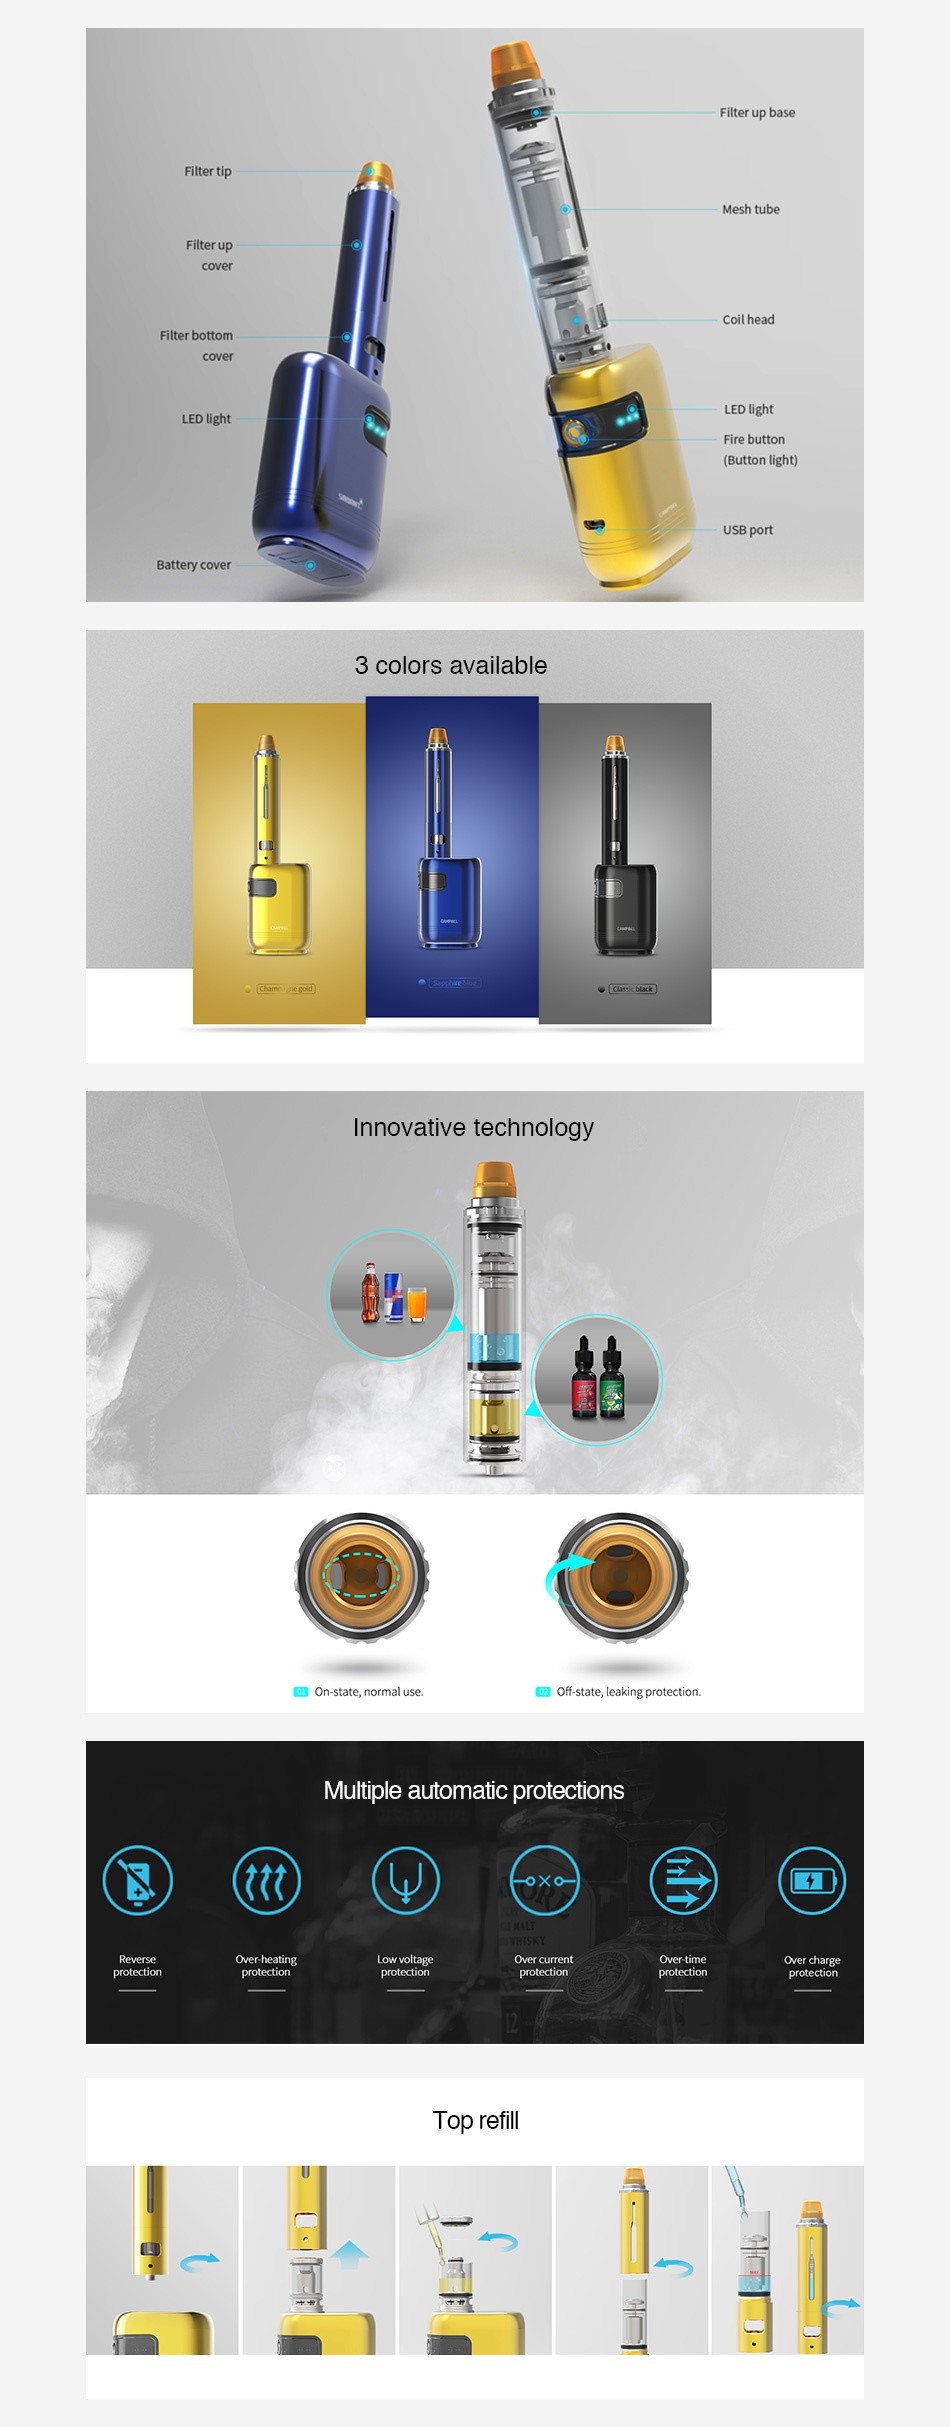 Smoant Campbel 80W VW Kit Filter up base Filter tip Filter up oll head FIlter bottom ED light Battery core 3 colors availabl Carnero Innovative technology o on state  normal us c2 Off  sta  e  leaking protection Multiple automatic protections     Low vol are protecti protecton